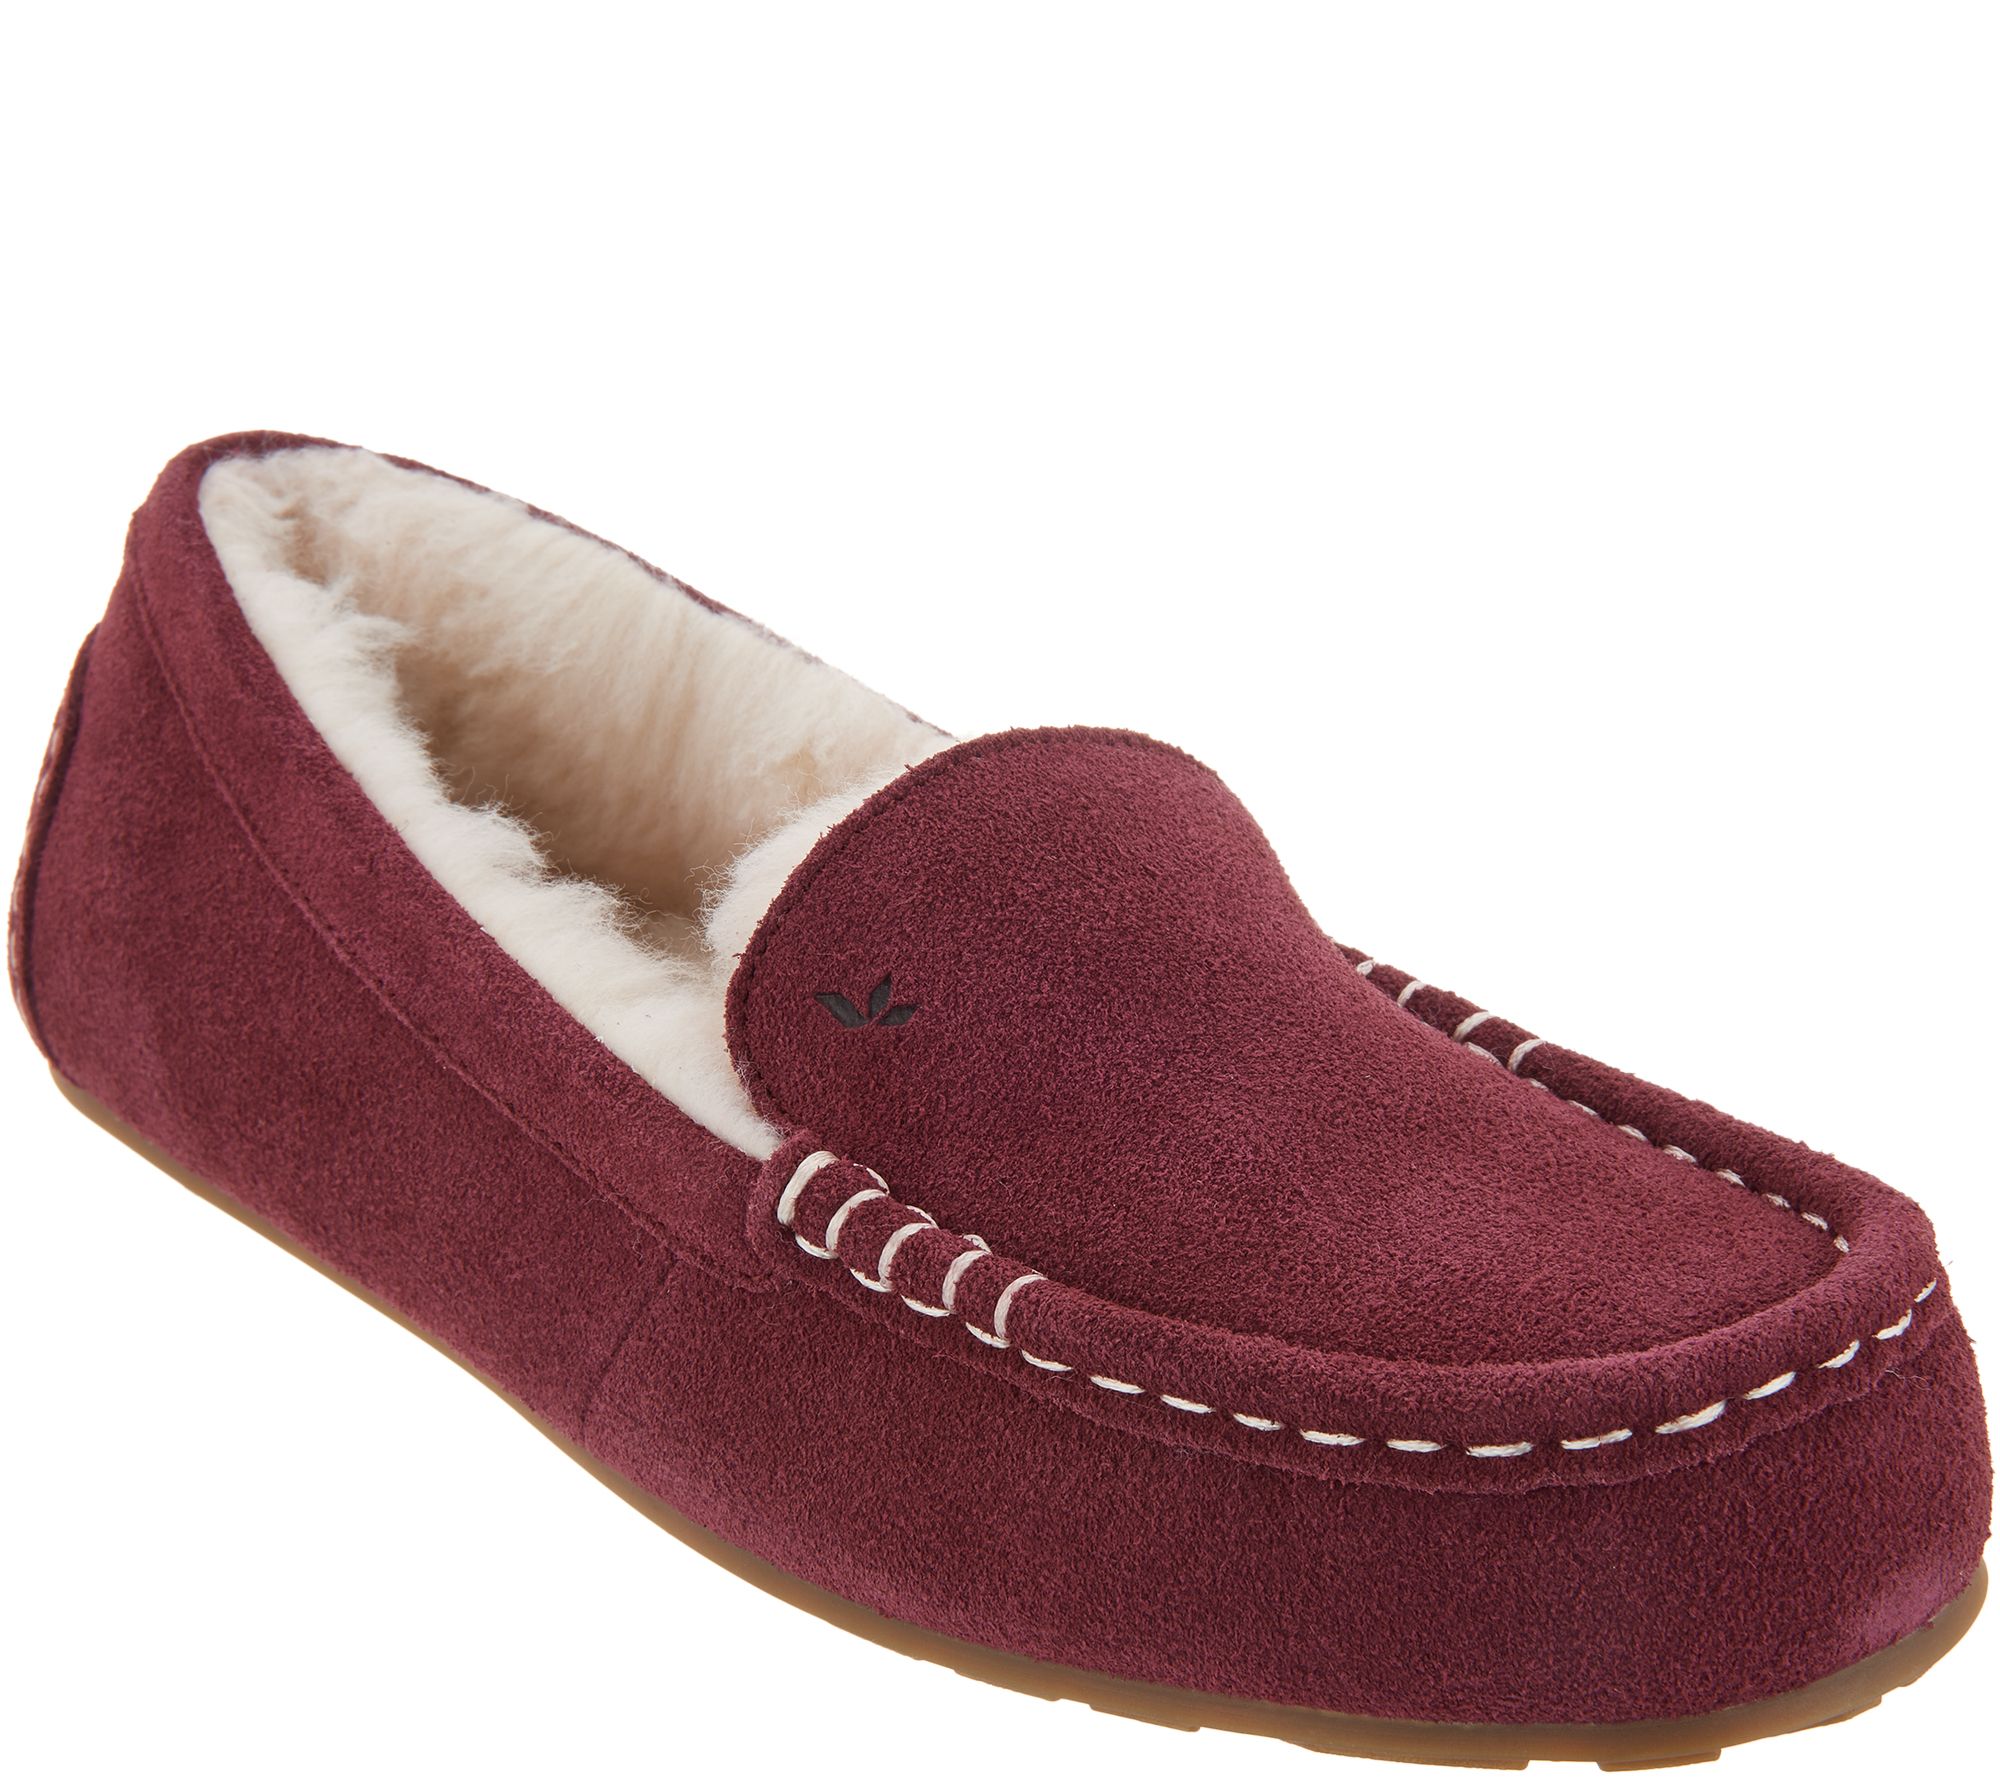 ugg slippers with removable insoles